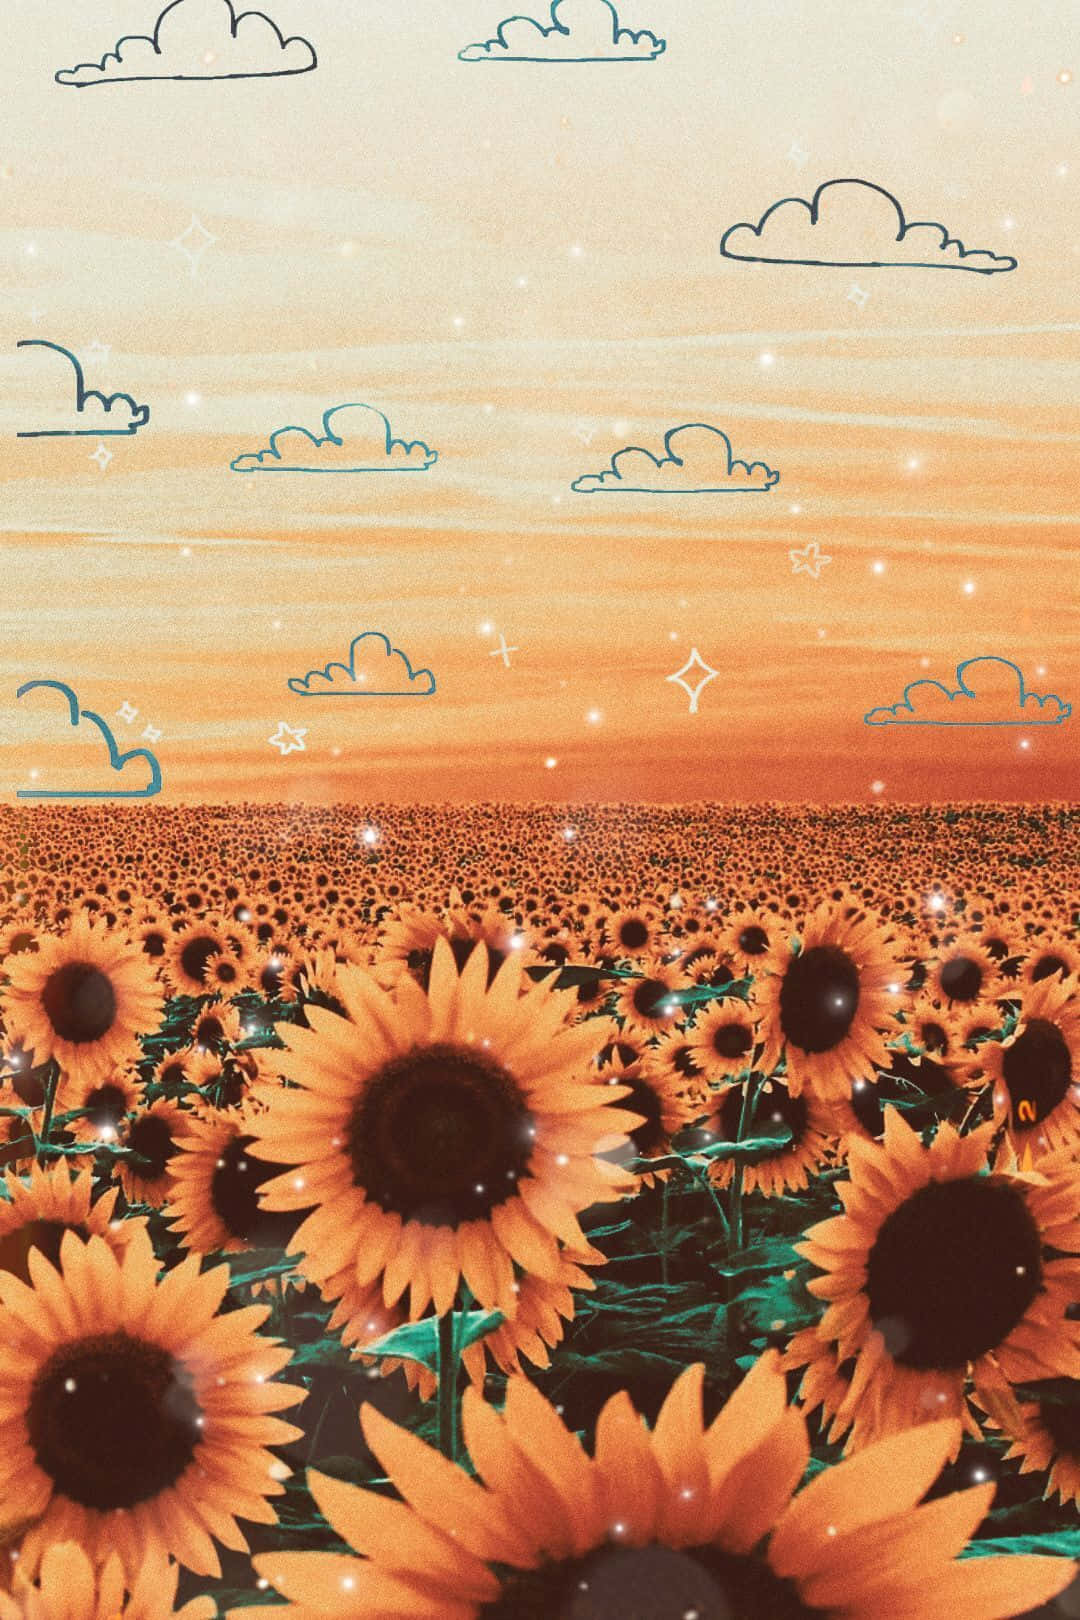 Sunflowers In The Sky With Clouds Wallpaper